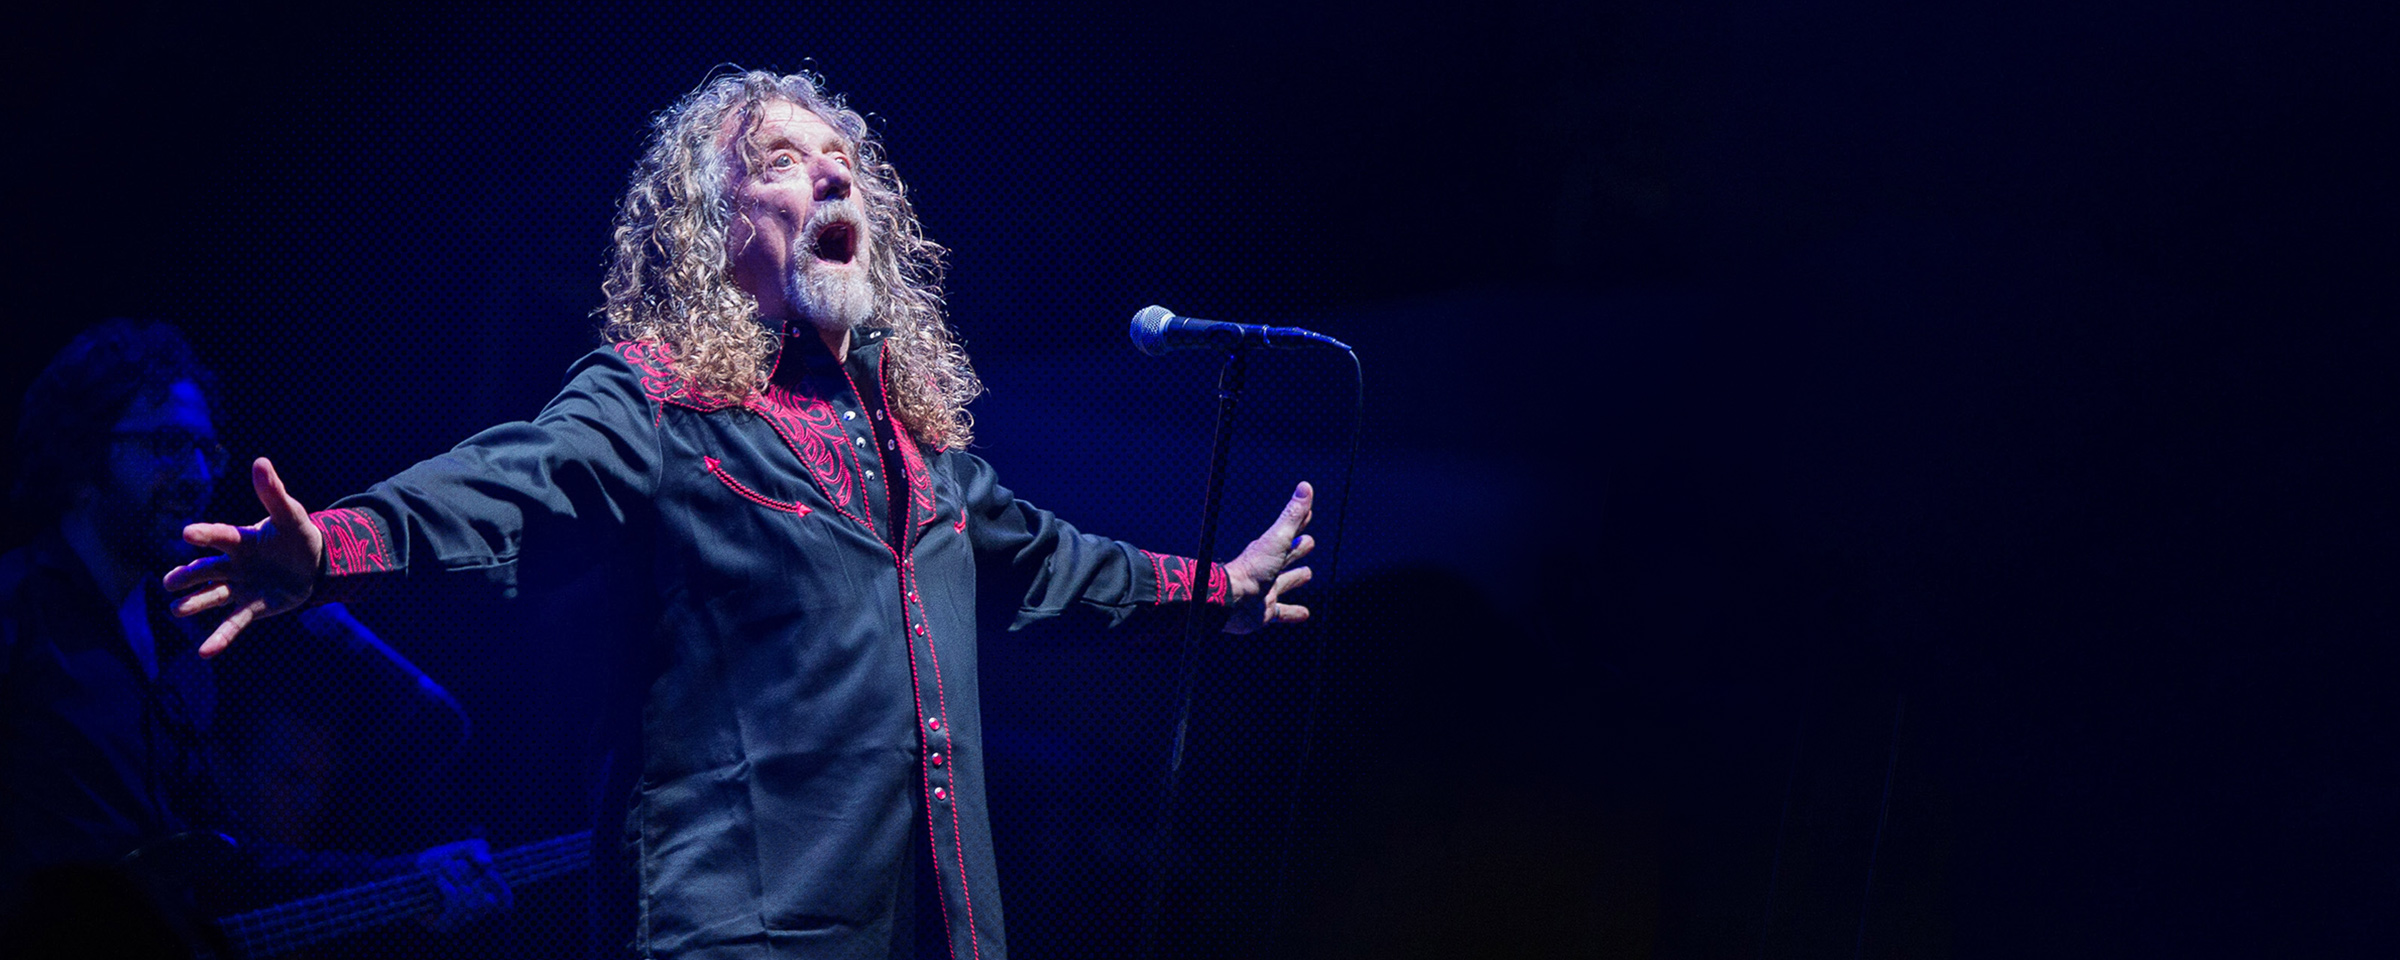 Robert Plant singing at a microphone